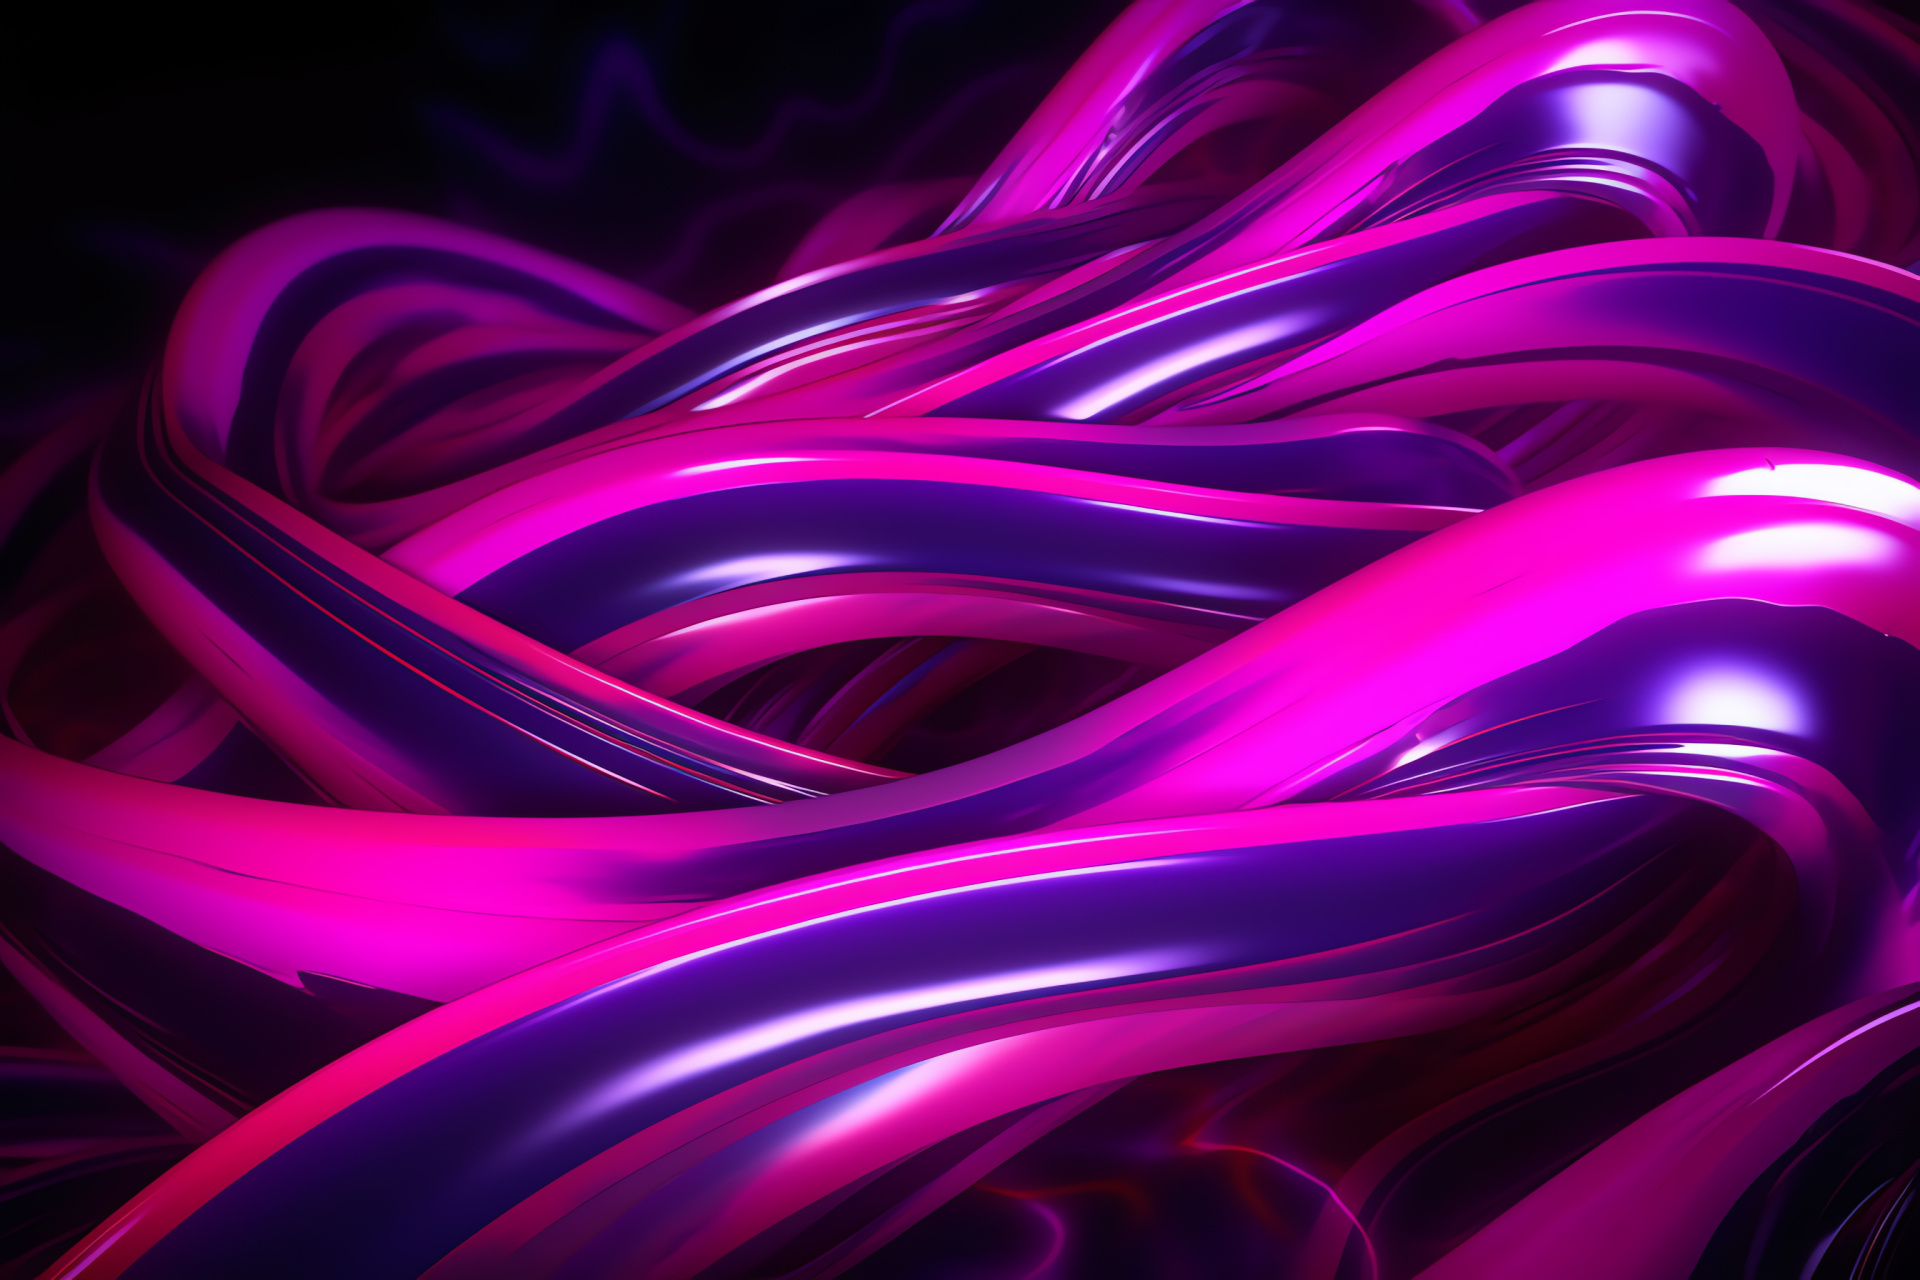 Serpentine glow, Vibrant pink reptile, Enigmatic snake movement, Hypnotic swirls background, Psychedelic color display, HD Desktop Wallpaper